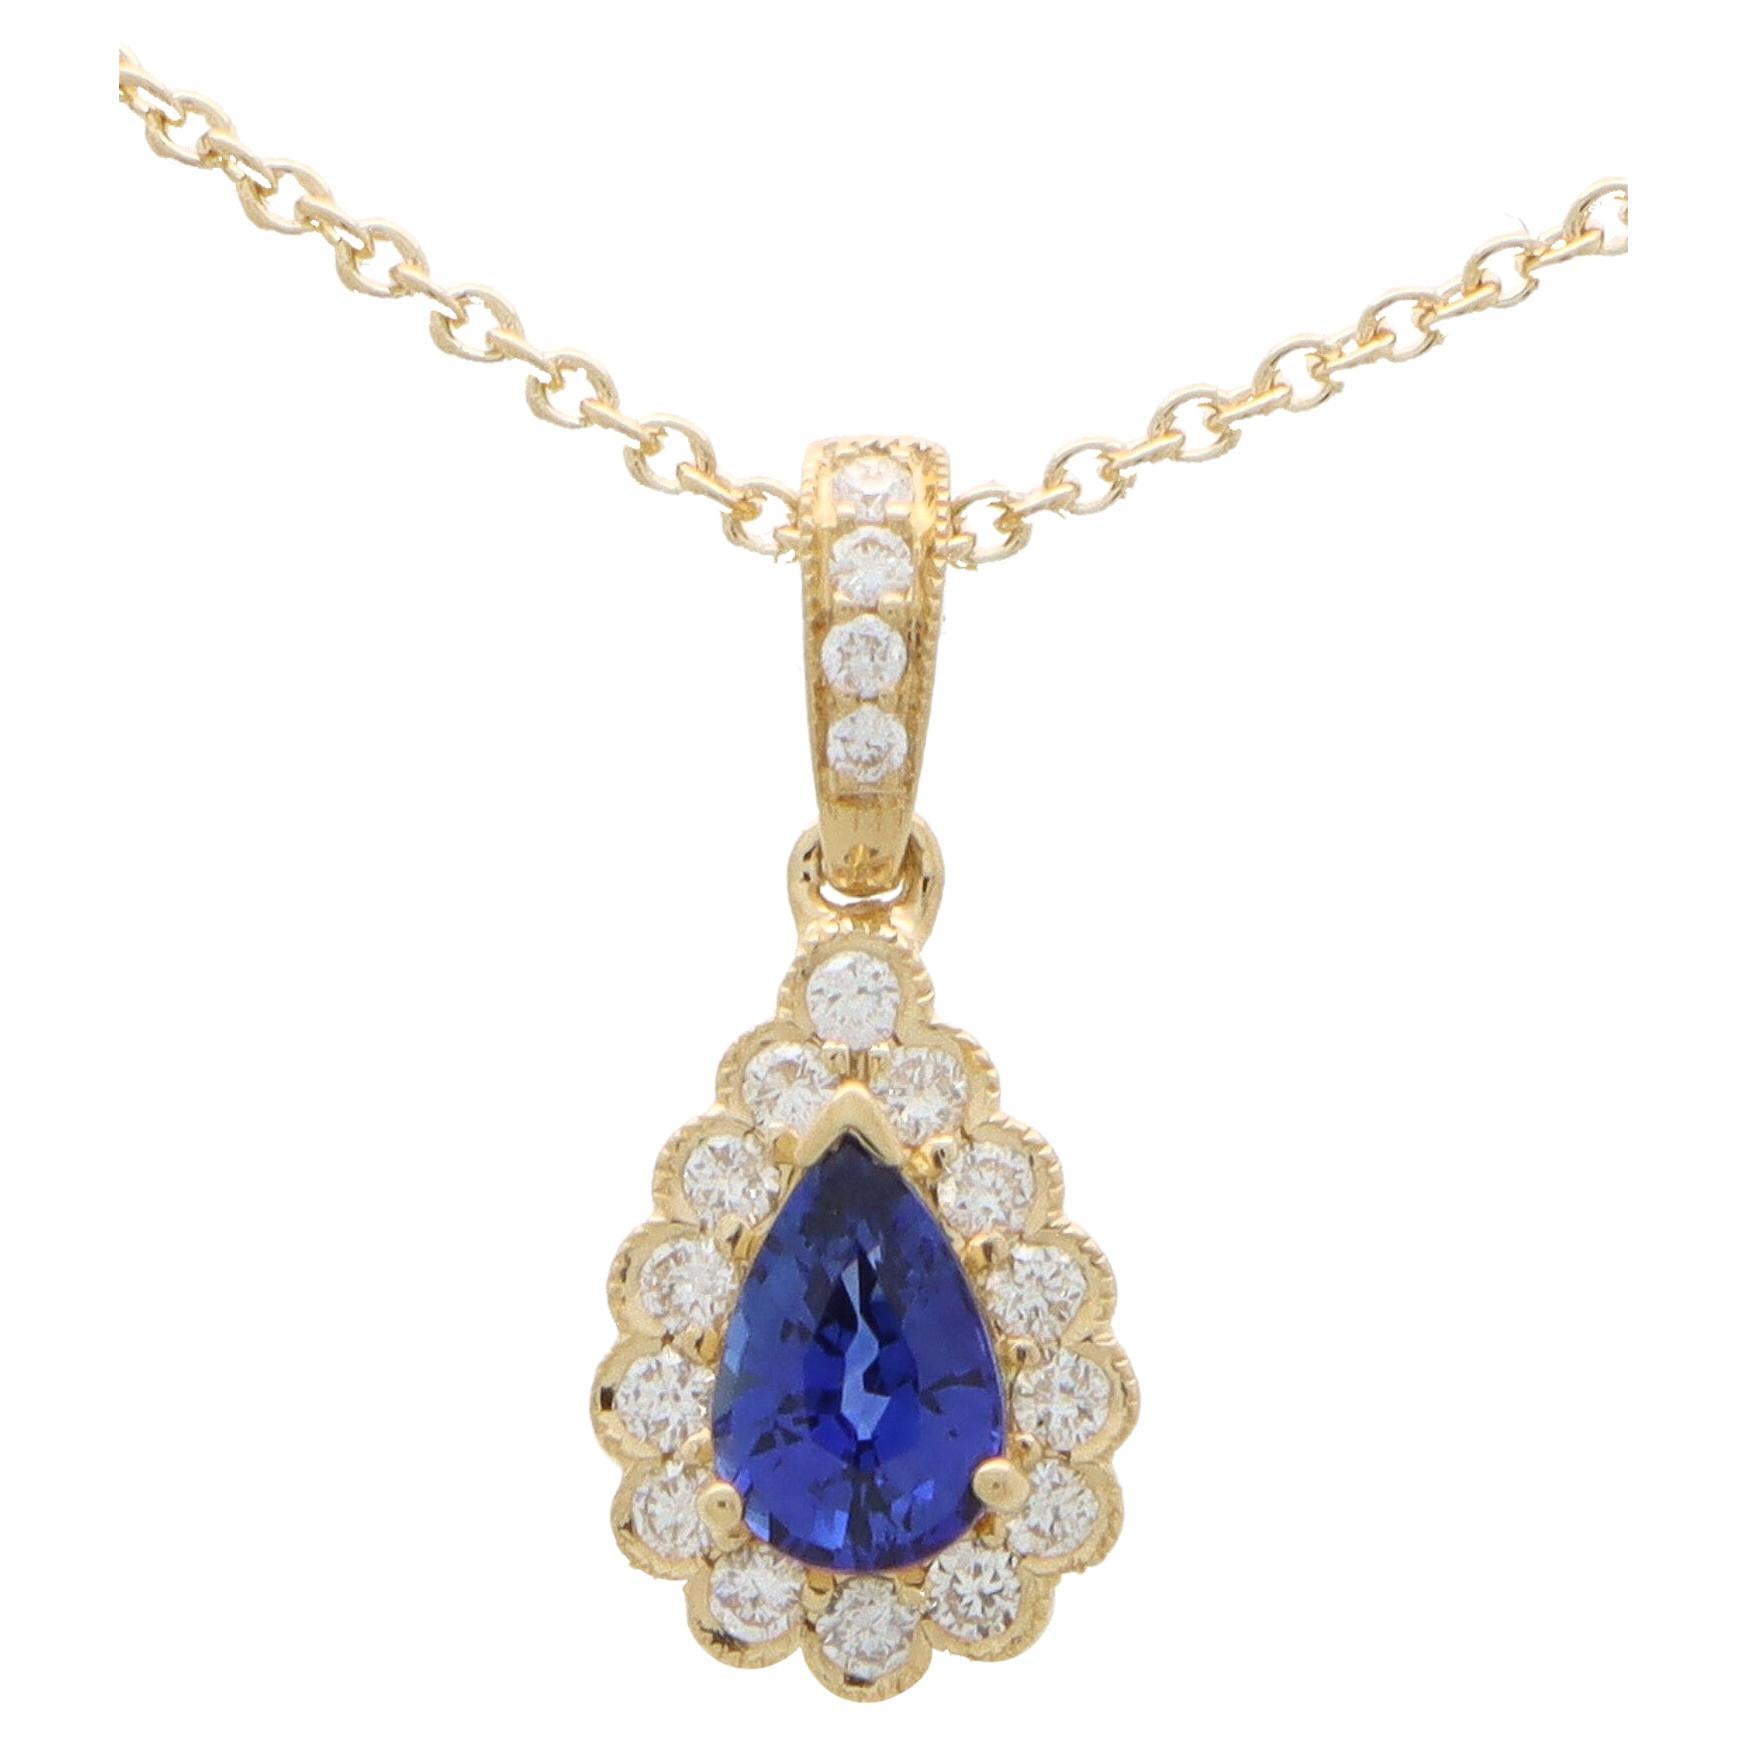 Sapphire and Diamond Pear Shaped Pendant Necklace in 18k Yellow Gold